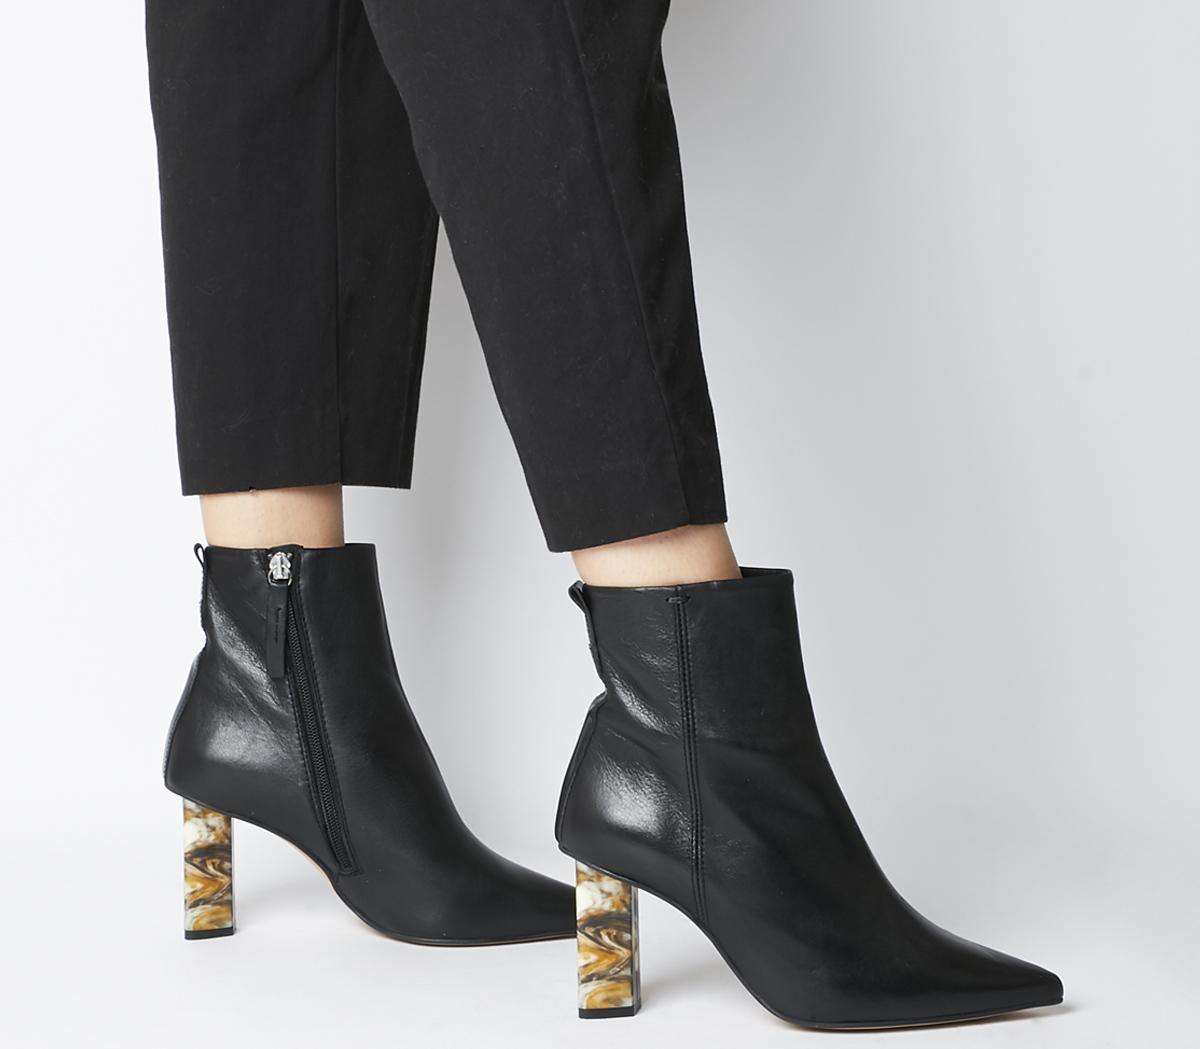 OFFICEAttention High Feature Heel BootsBlack Leather Feature Heel